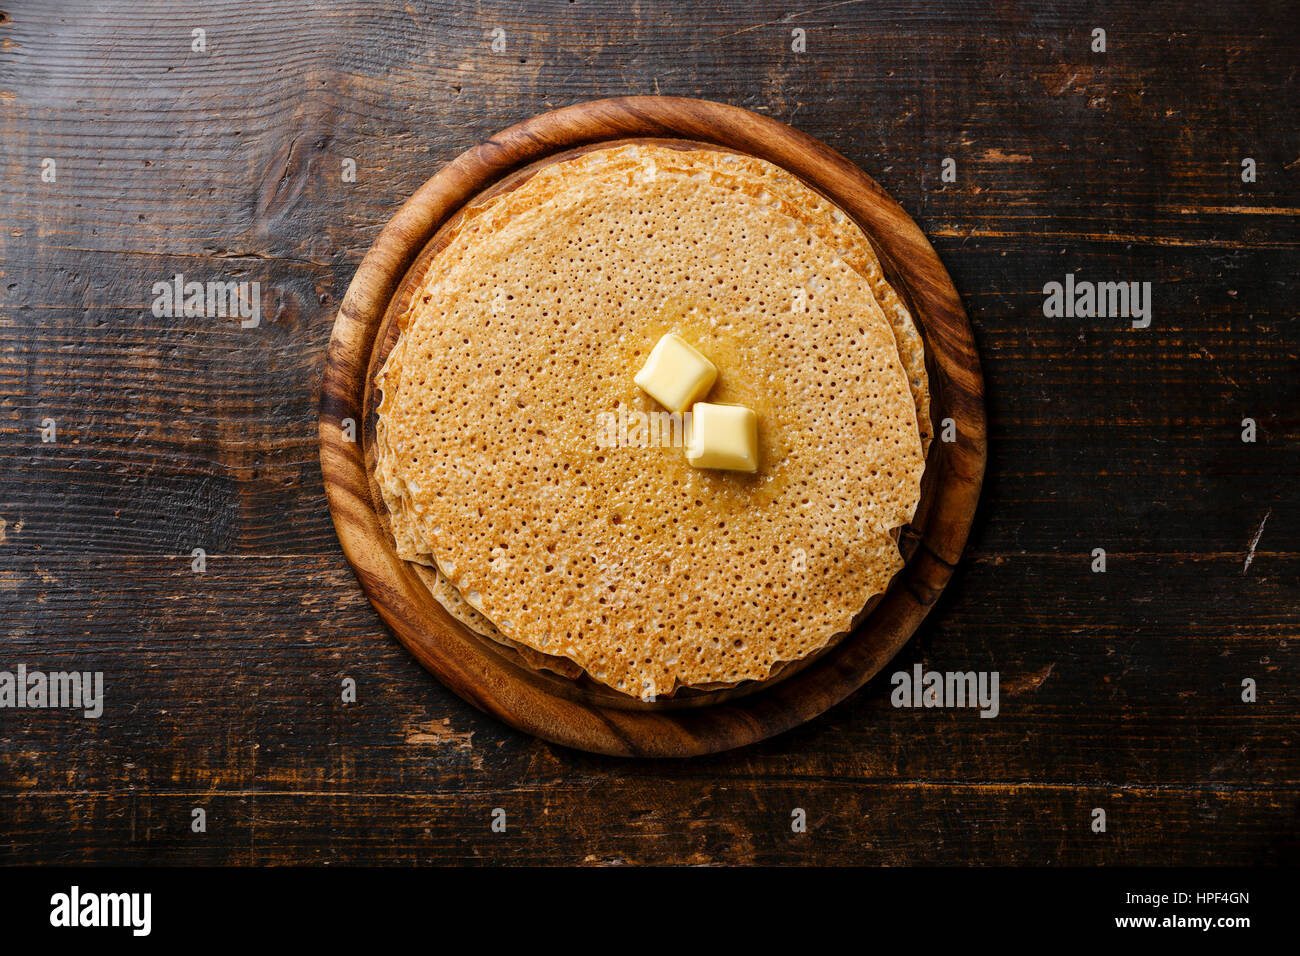 Pancakes with butter on wooden background Stock Photo